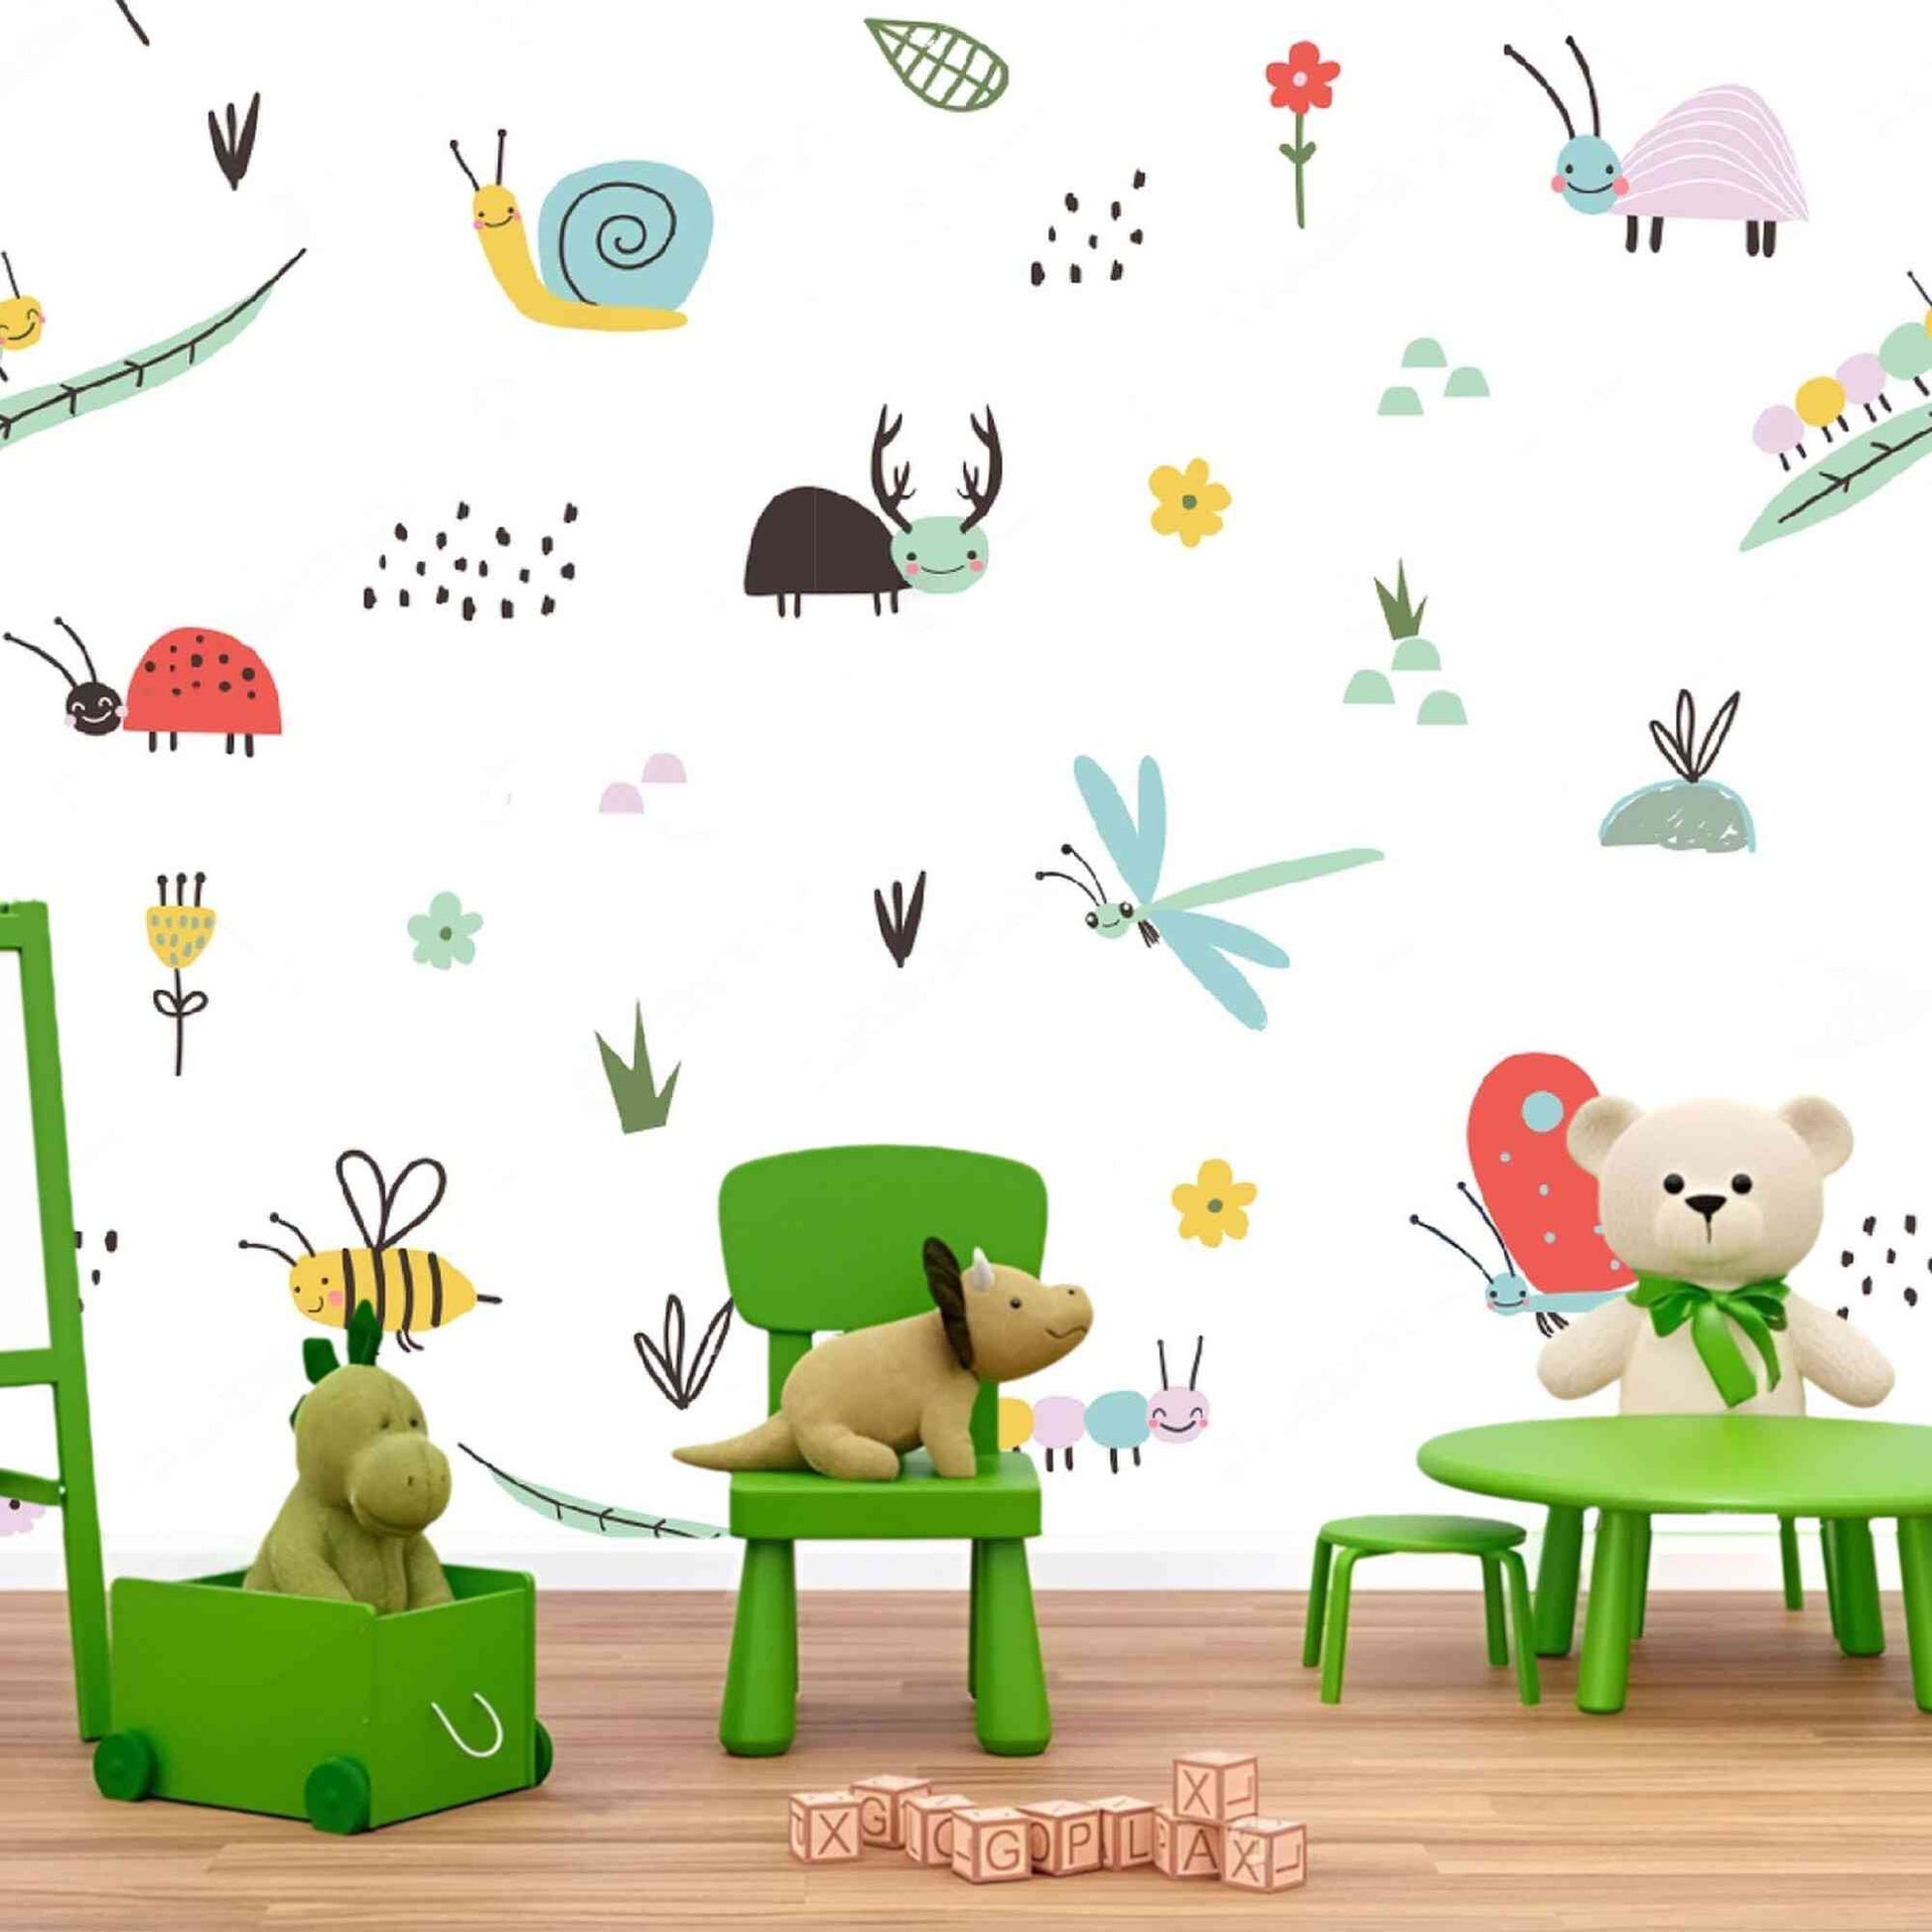 Cartoon insect wallpaper for babies - playful and vibrant design.